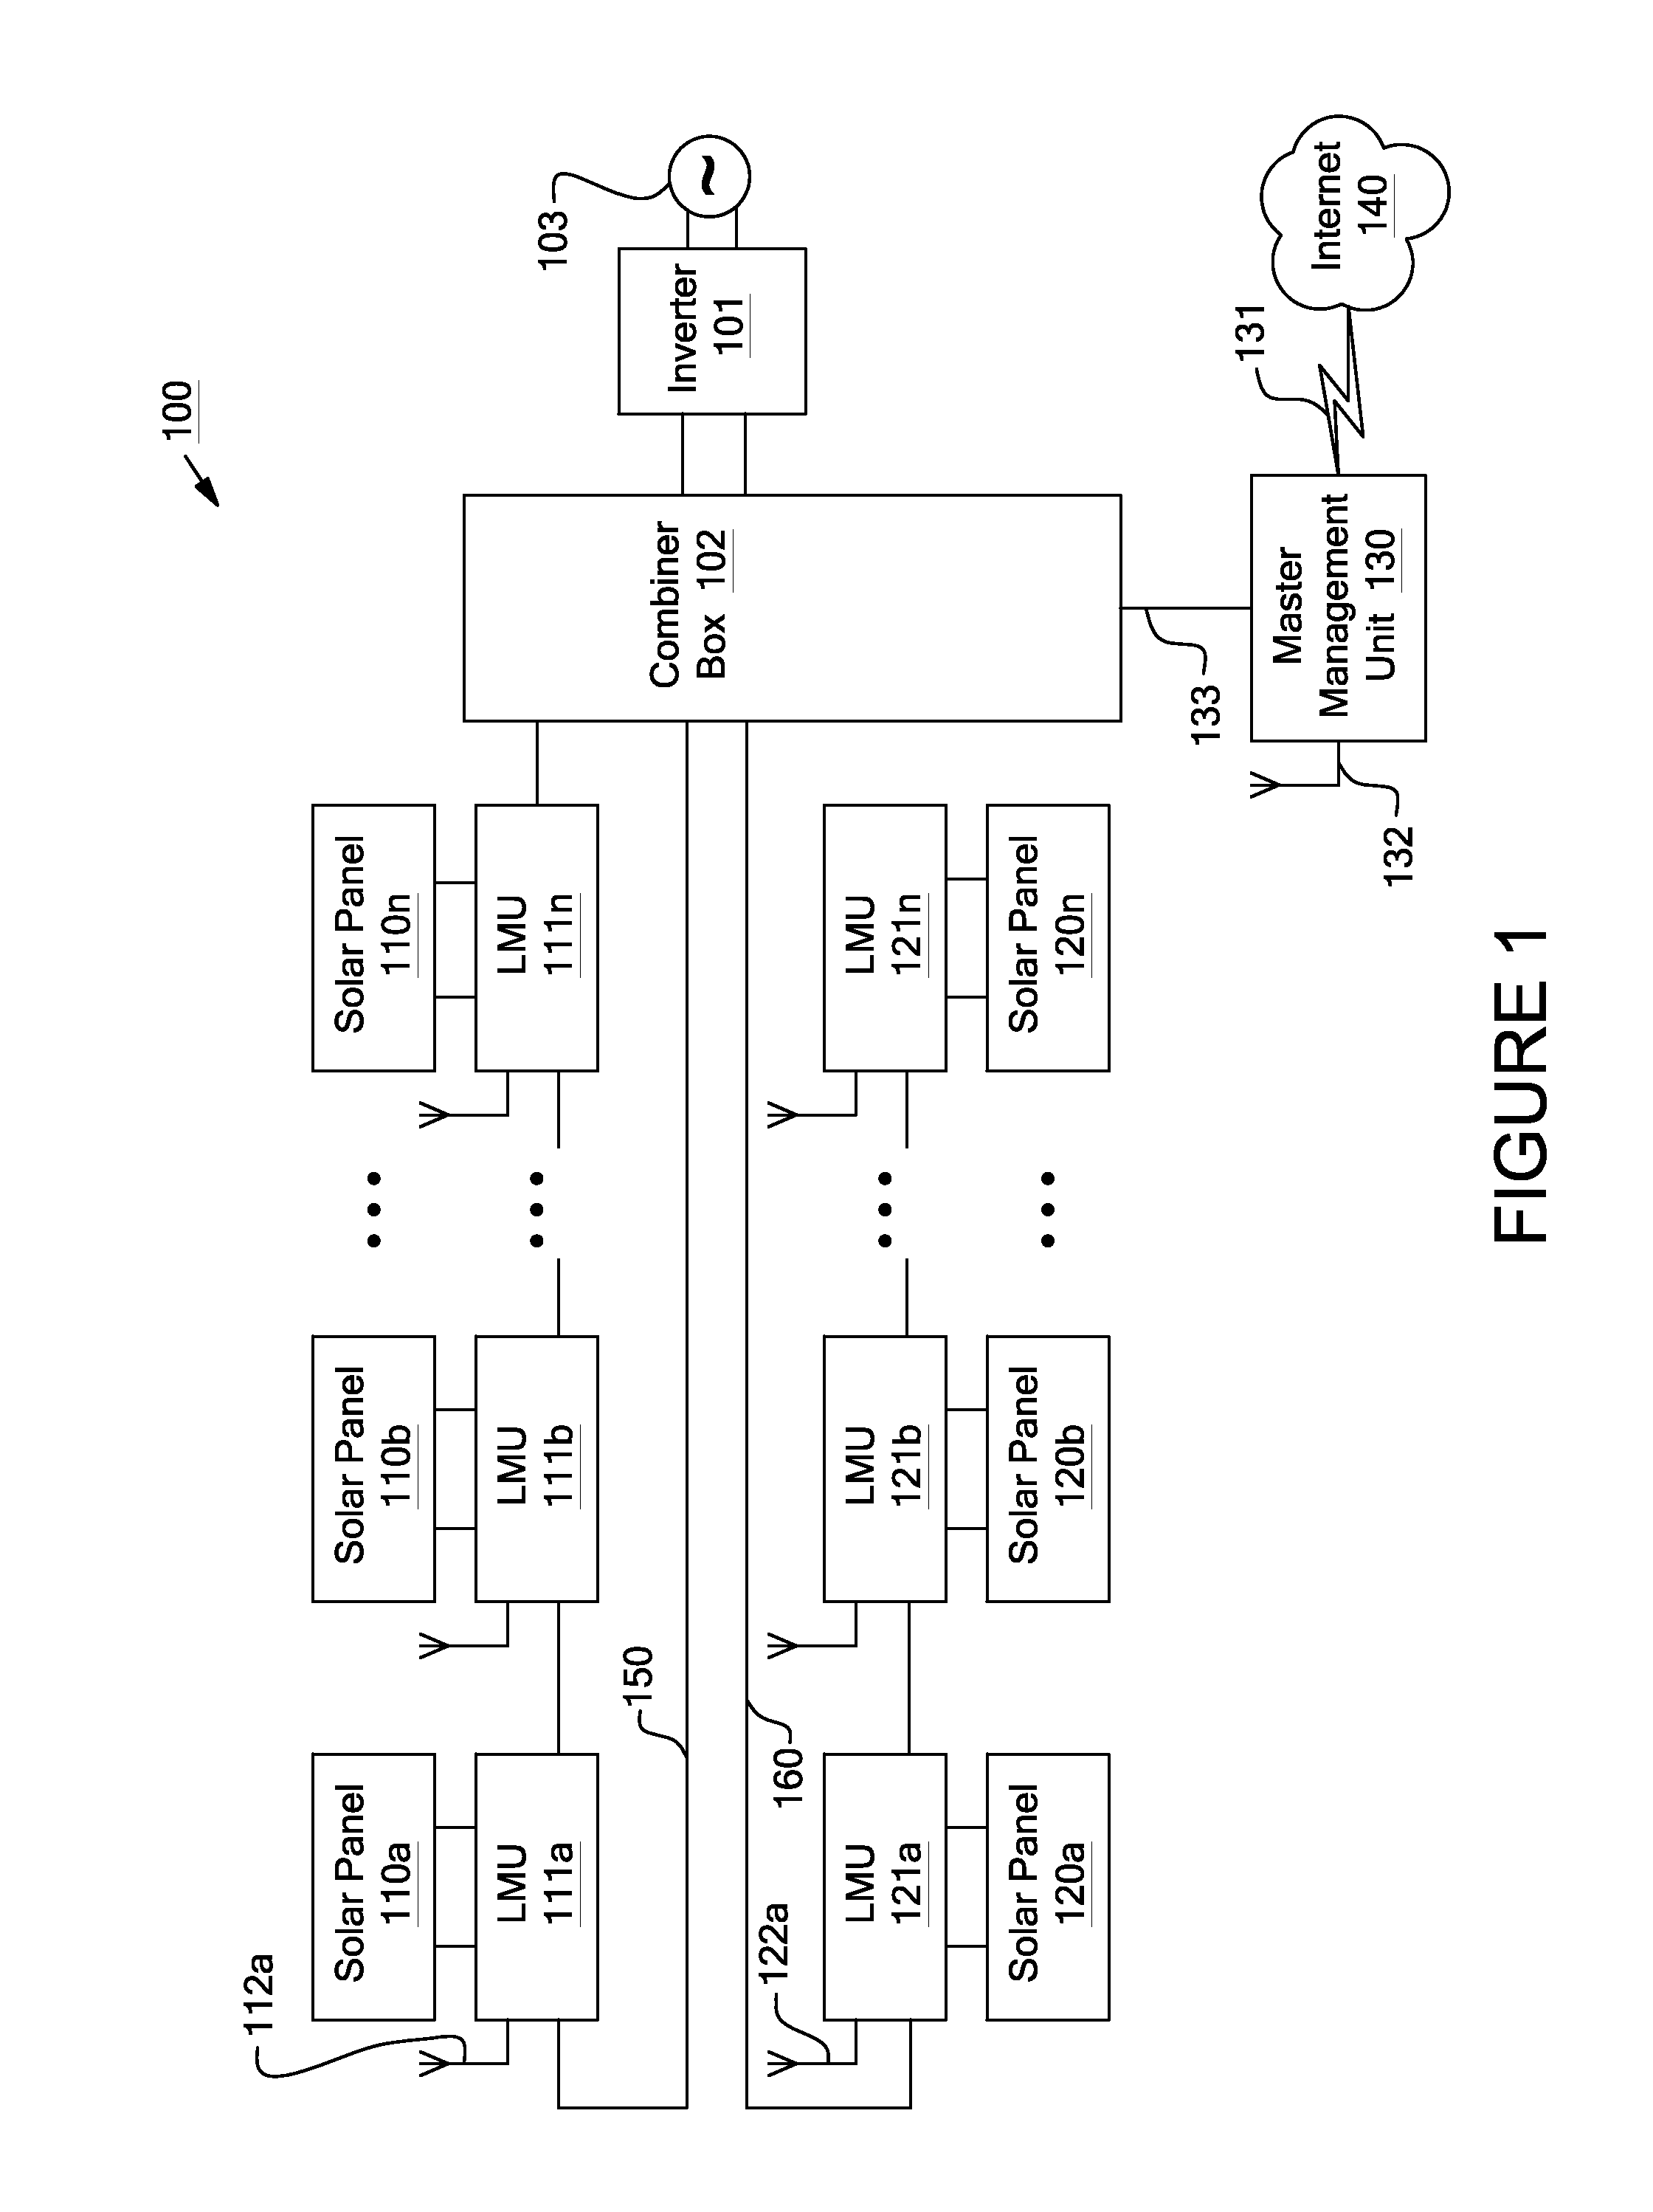 Systems and methods for an identification protocol between a local controller and a master controller in a photovoltaic power generation system